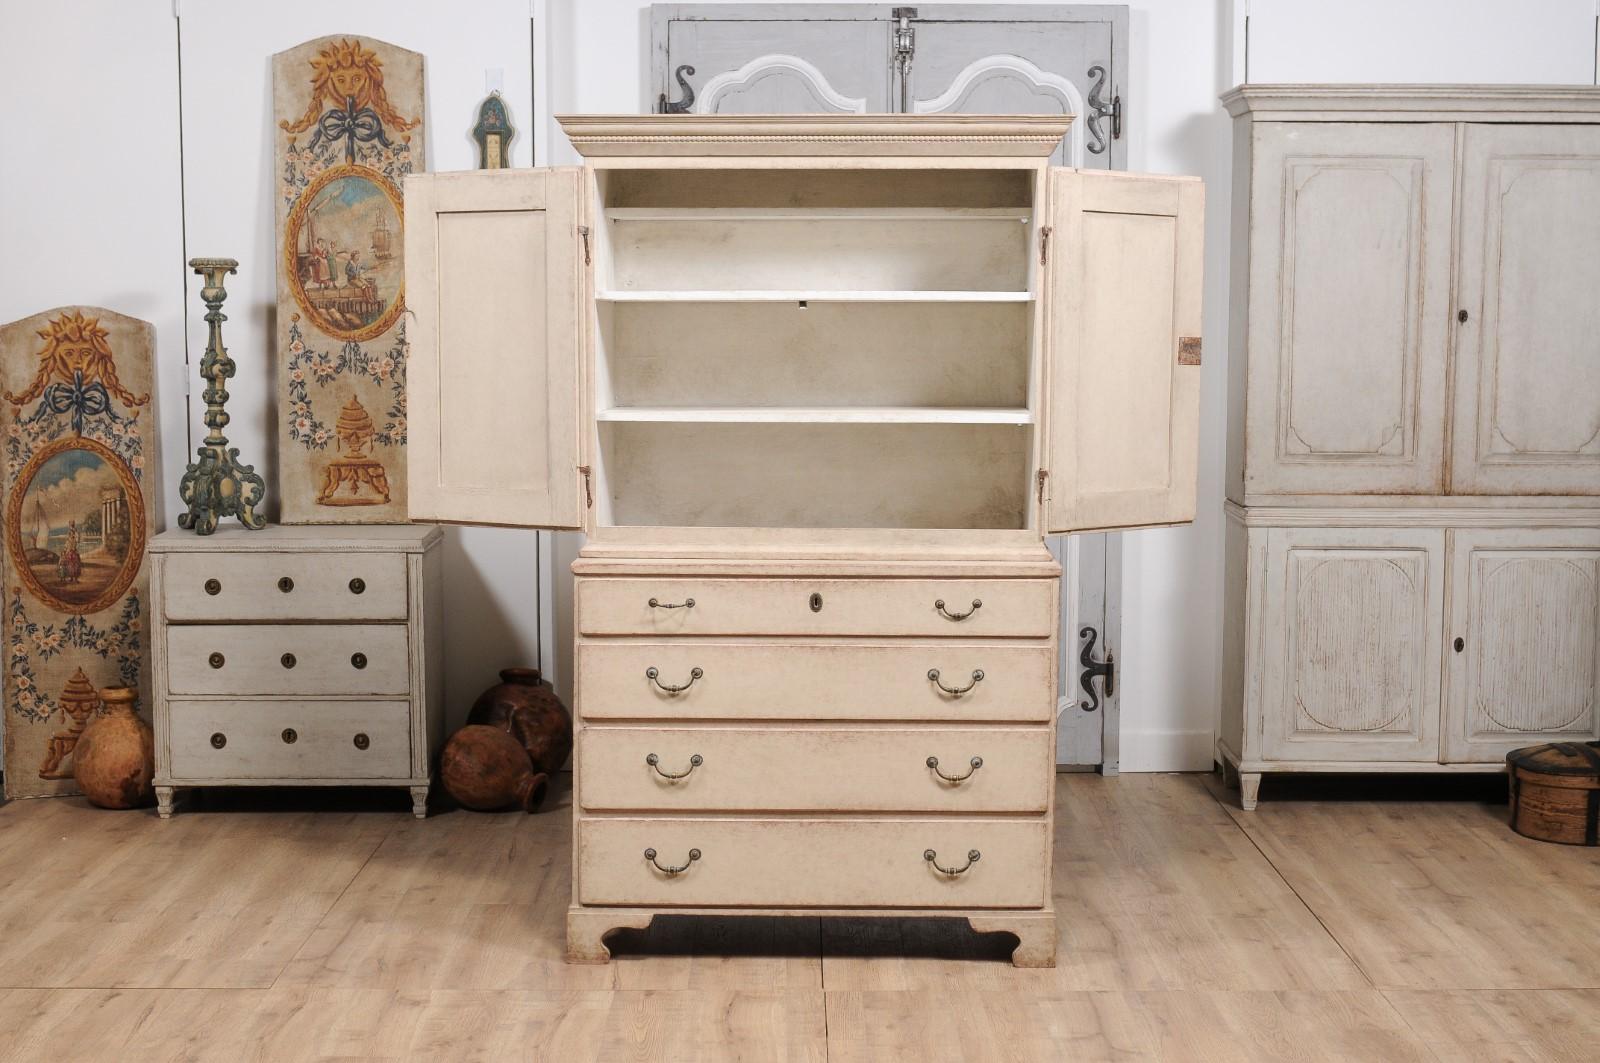 1834 Swedish Two-part Painted Cabinet with Doors and Graduated Drawers For Sale 6